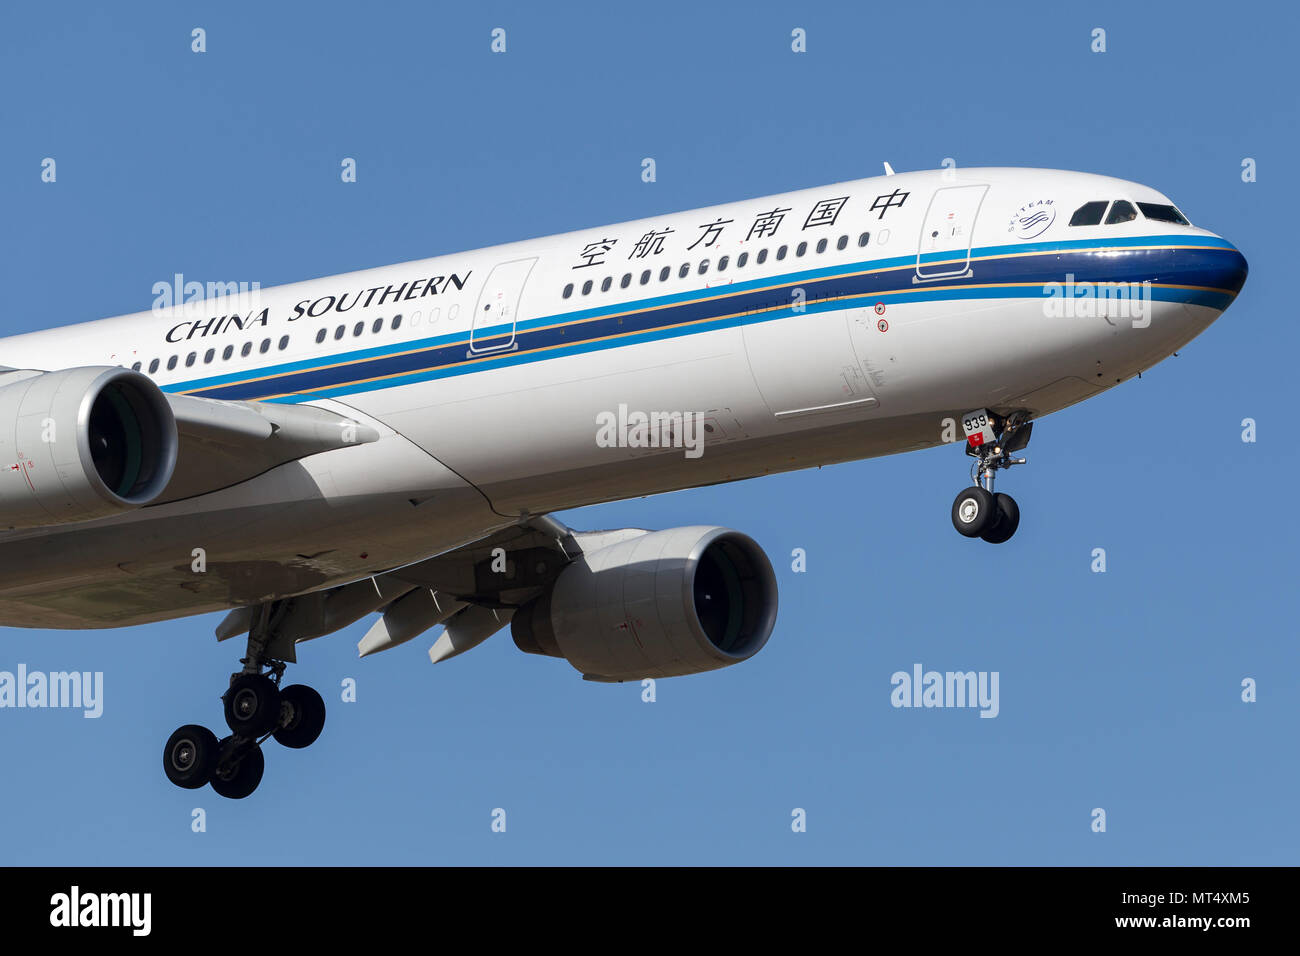 Melbourne, Australia - November 8, 2014: China Southern Airlines Airbus A330-323 B-5939 on approach to land at Melbourne International Airport. Stock Photo